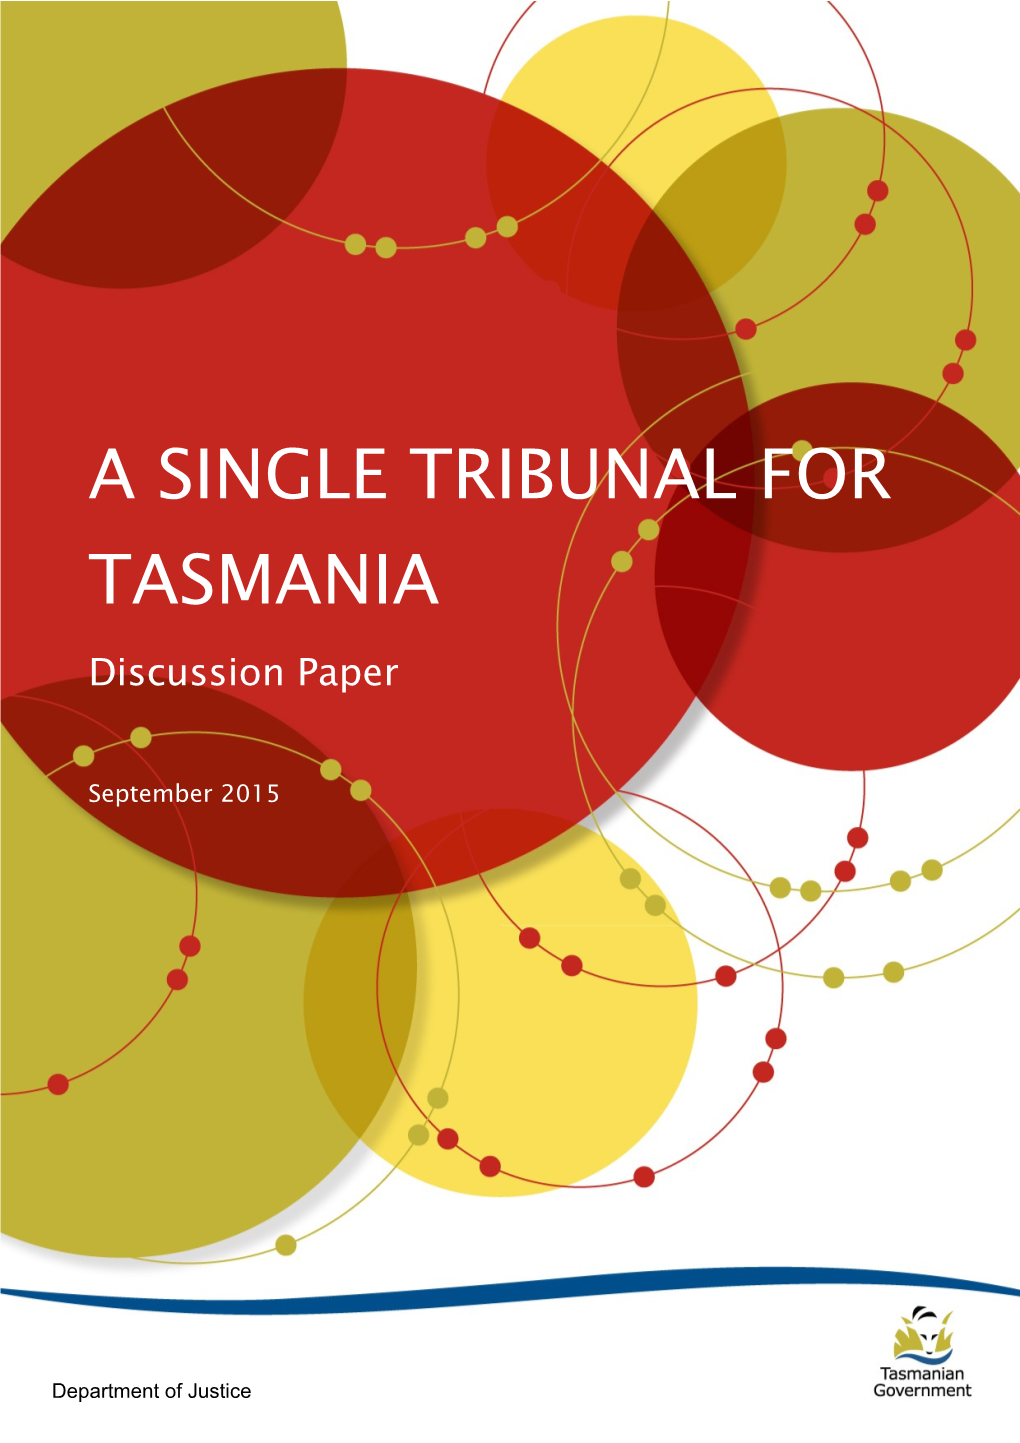 A Single Tribunal: Discussion Paper. September 2015